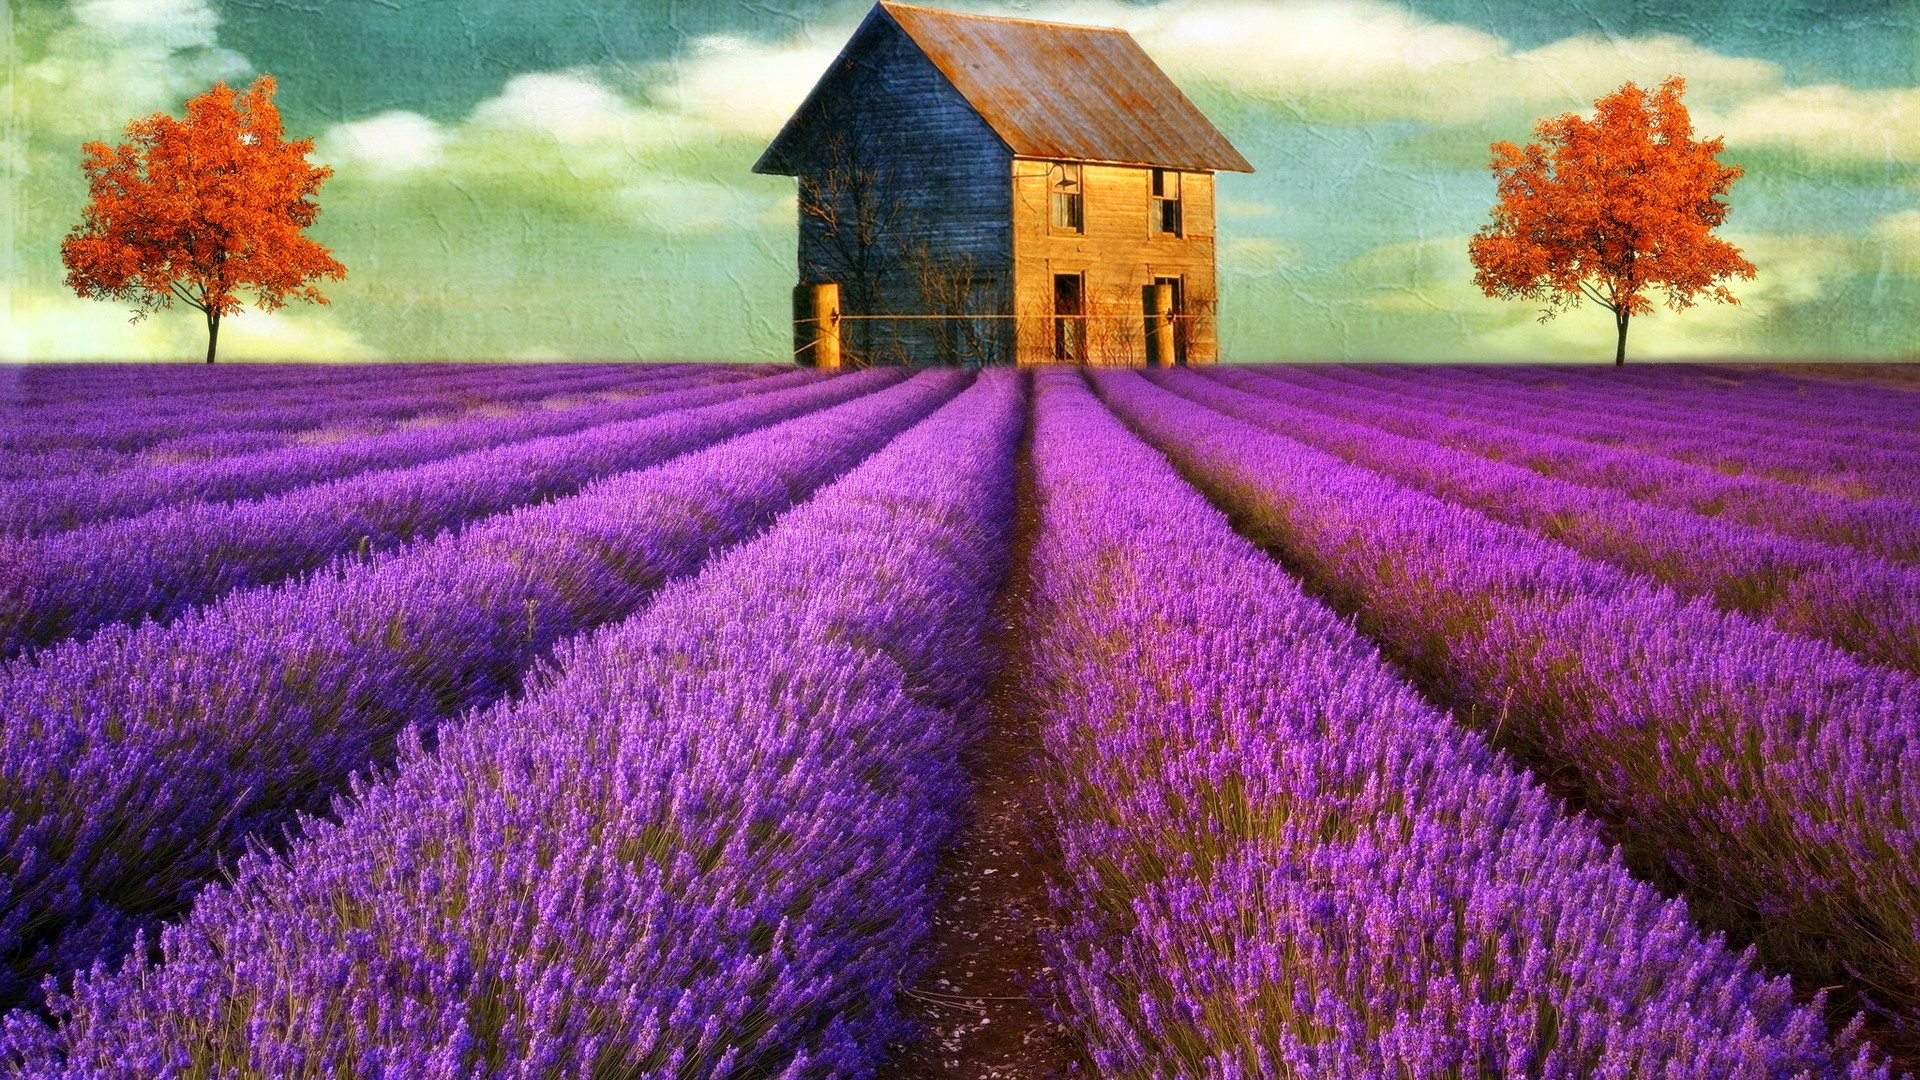 Lavender Field With Cottage - 1920x1080 Wallpaper 